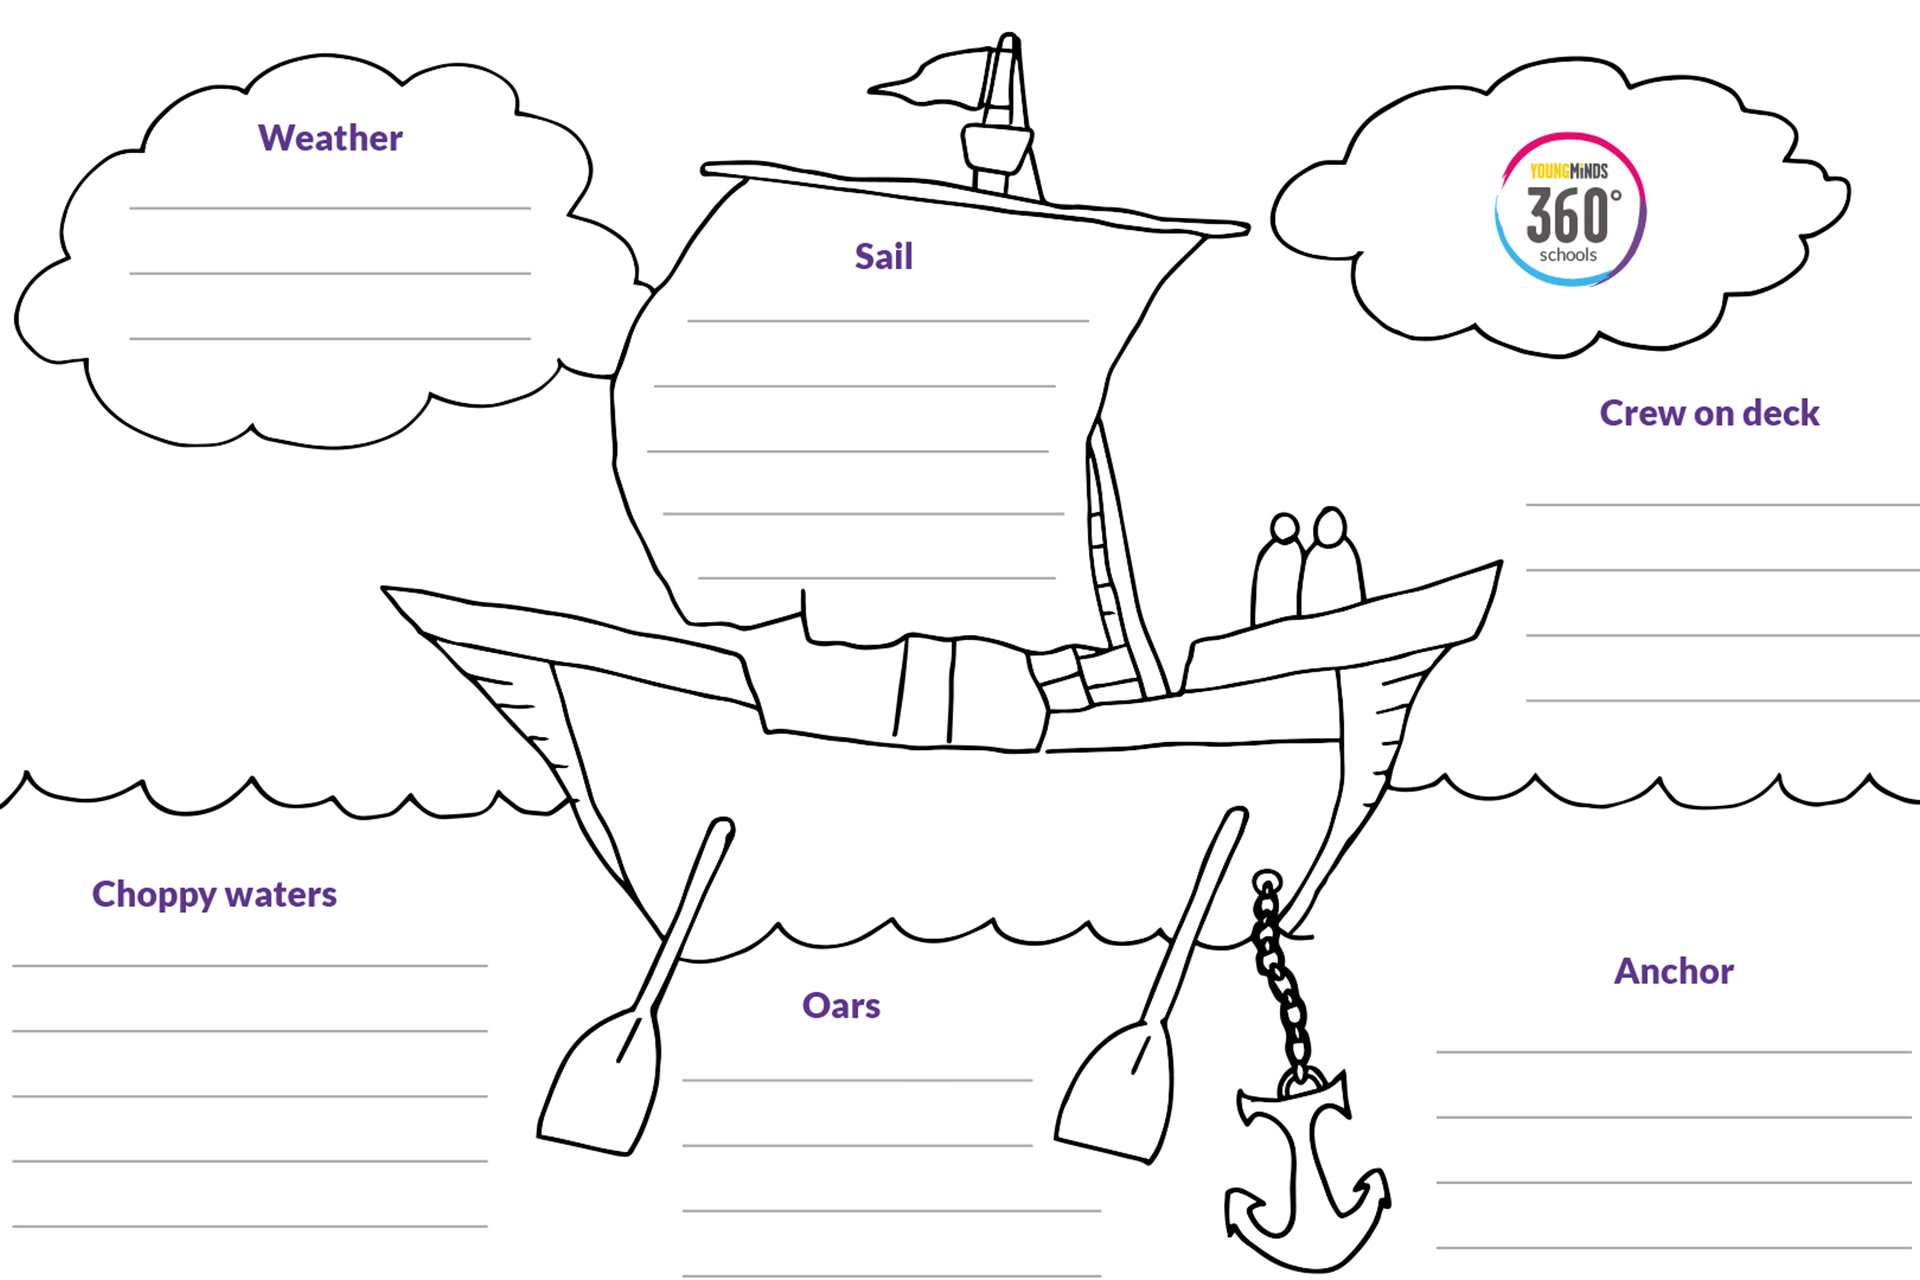 An image of our Resilience Boat activity. In the middle of the image is an outline of a ship with sails, oars and an anchor, around the boat are outlines of the sea and clouds. 